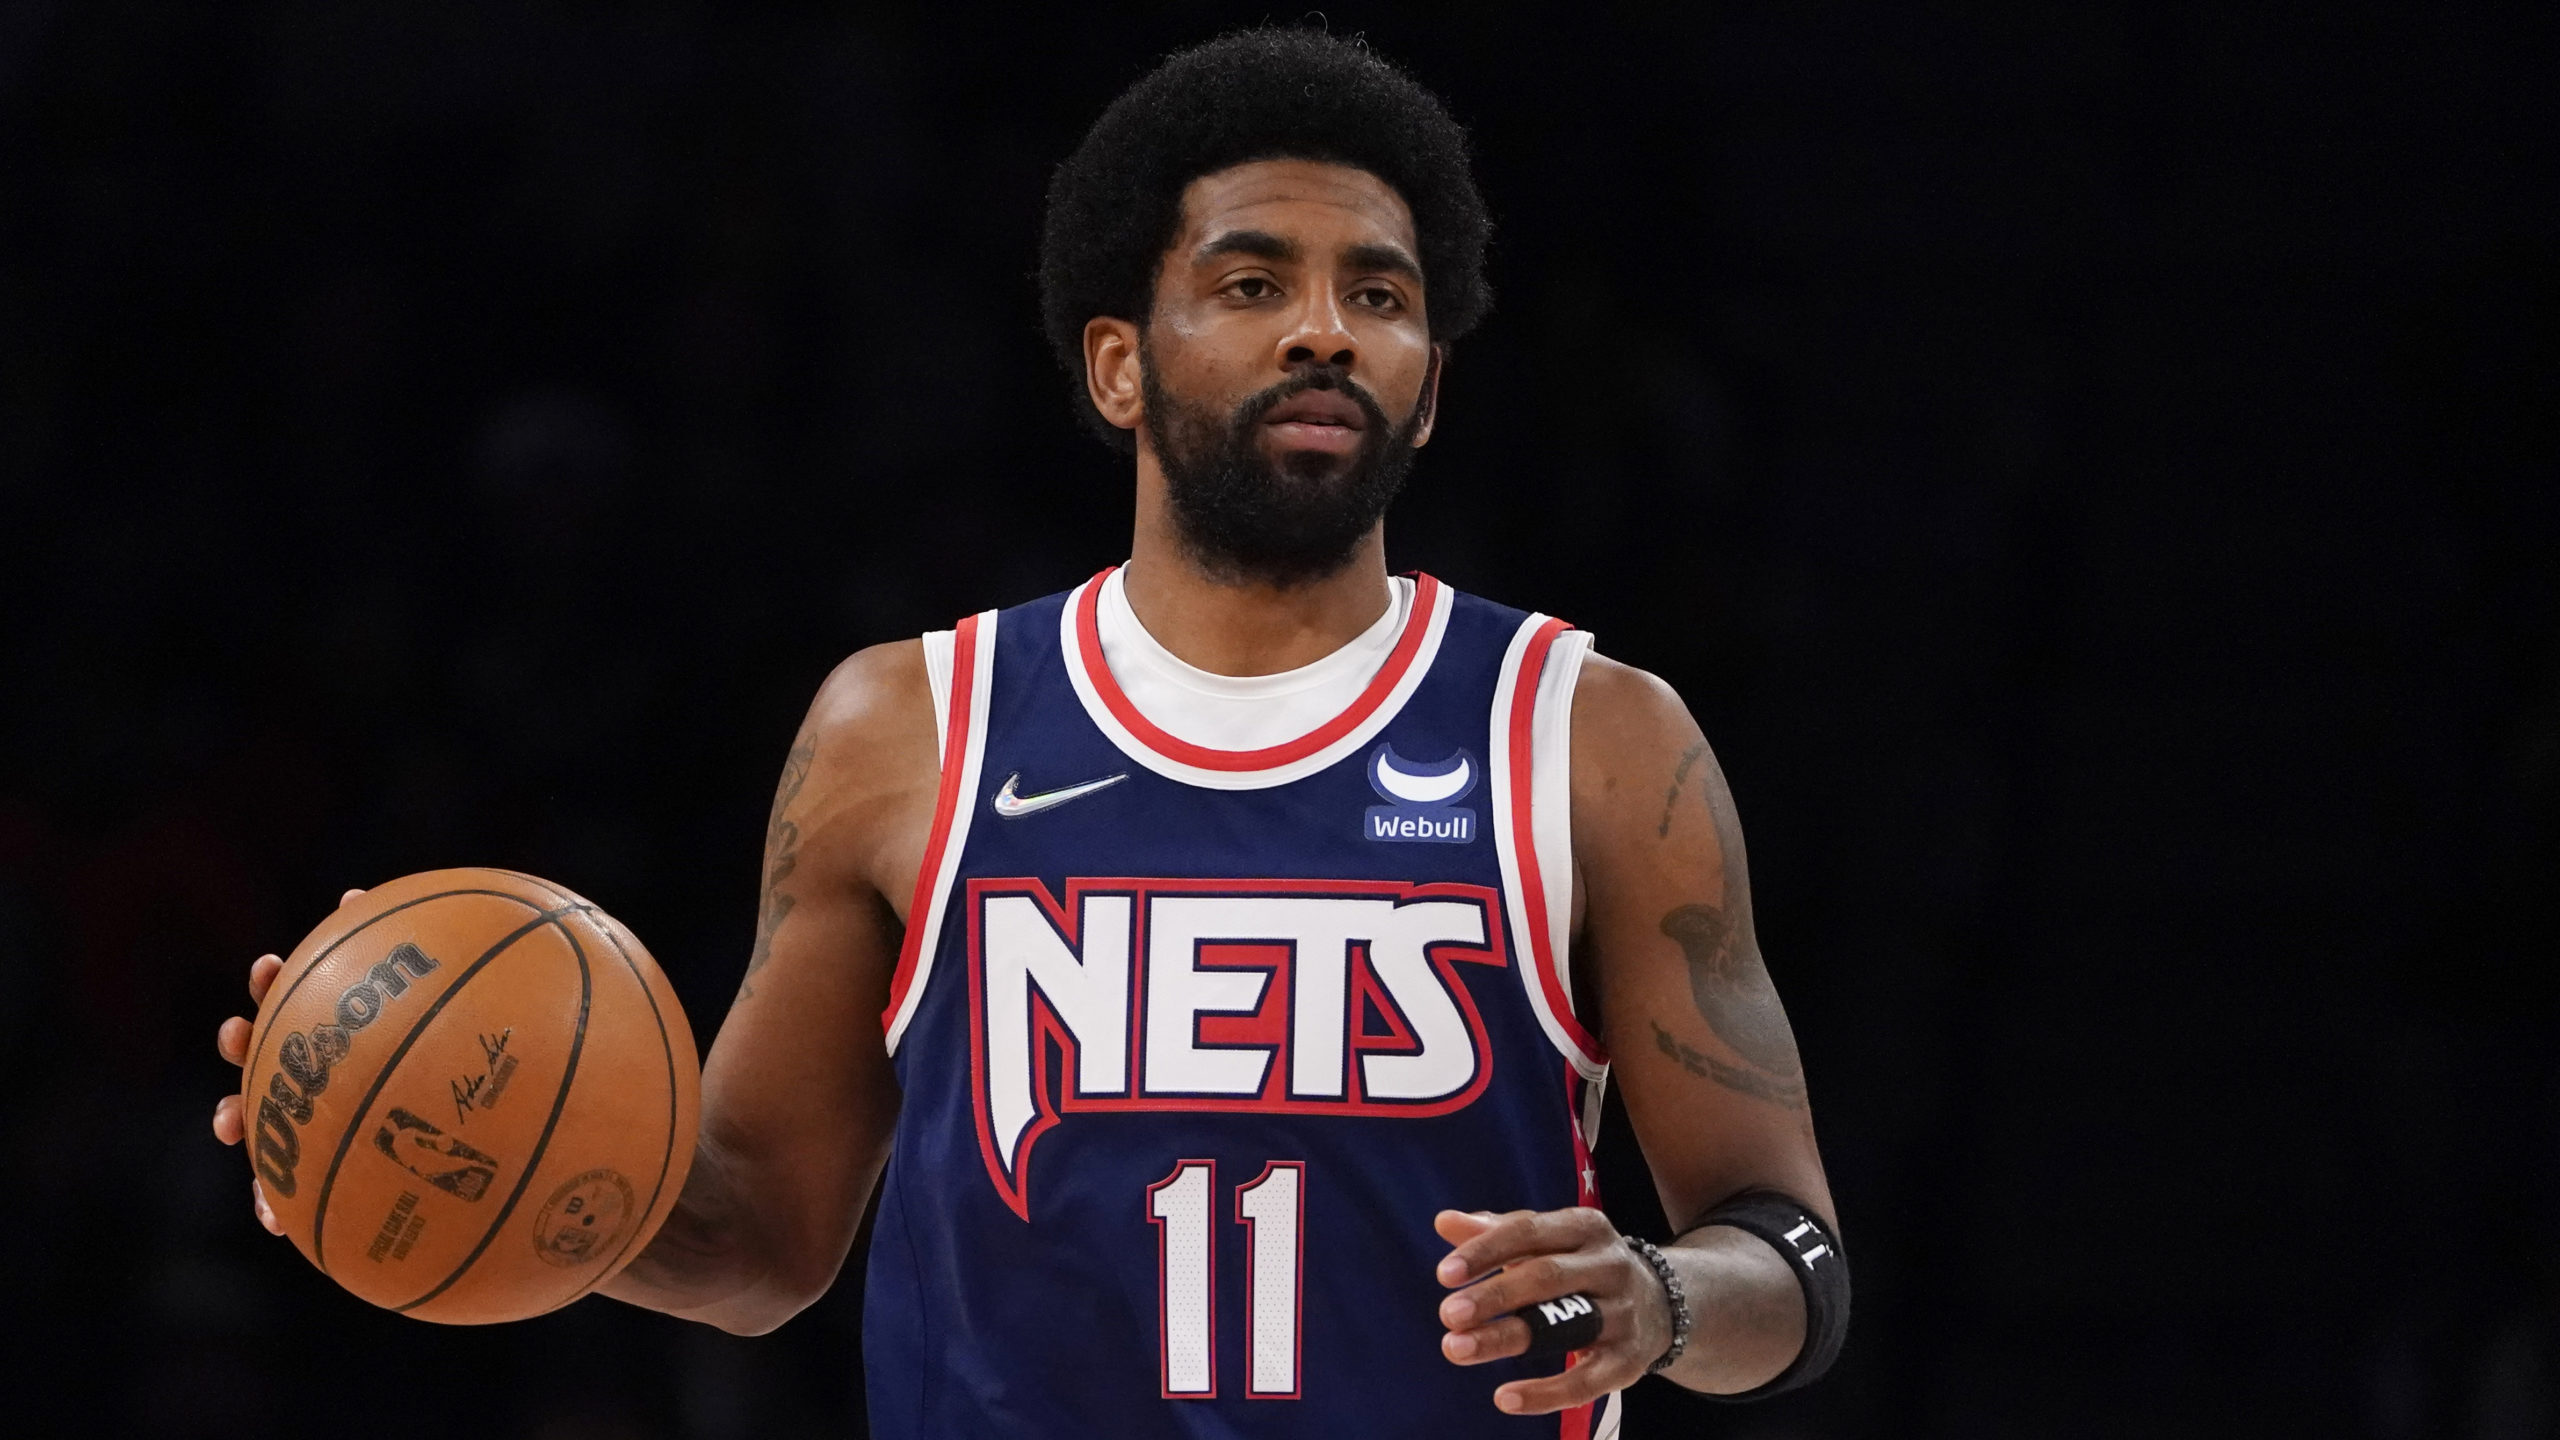 ESSAY: Crucial week begins with no resolution of Kyrie Irving status -  NetsDaily